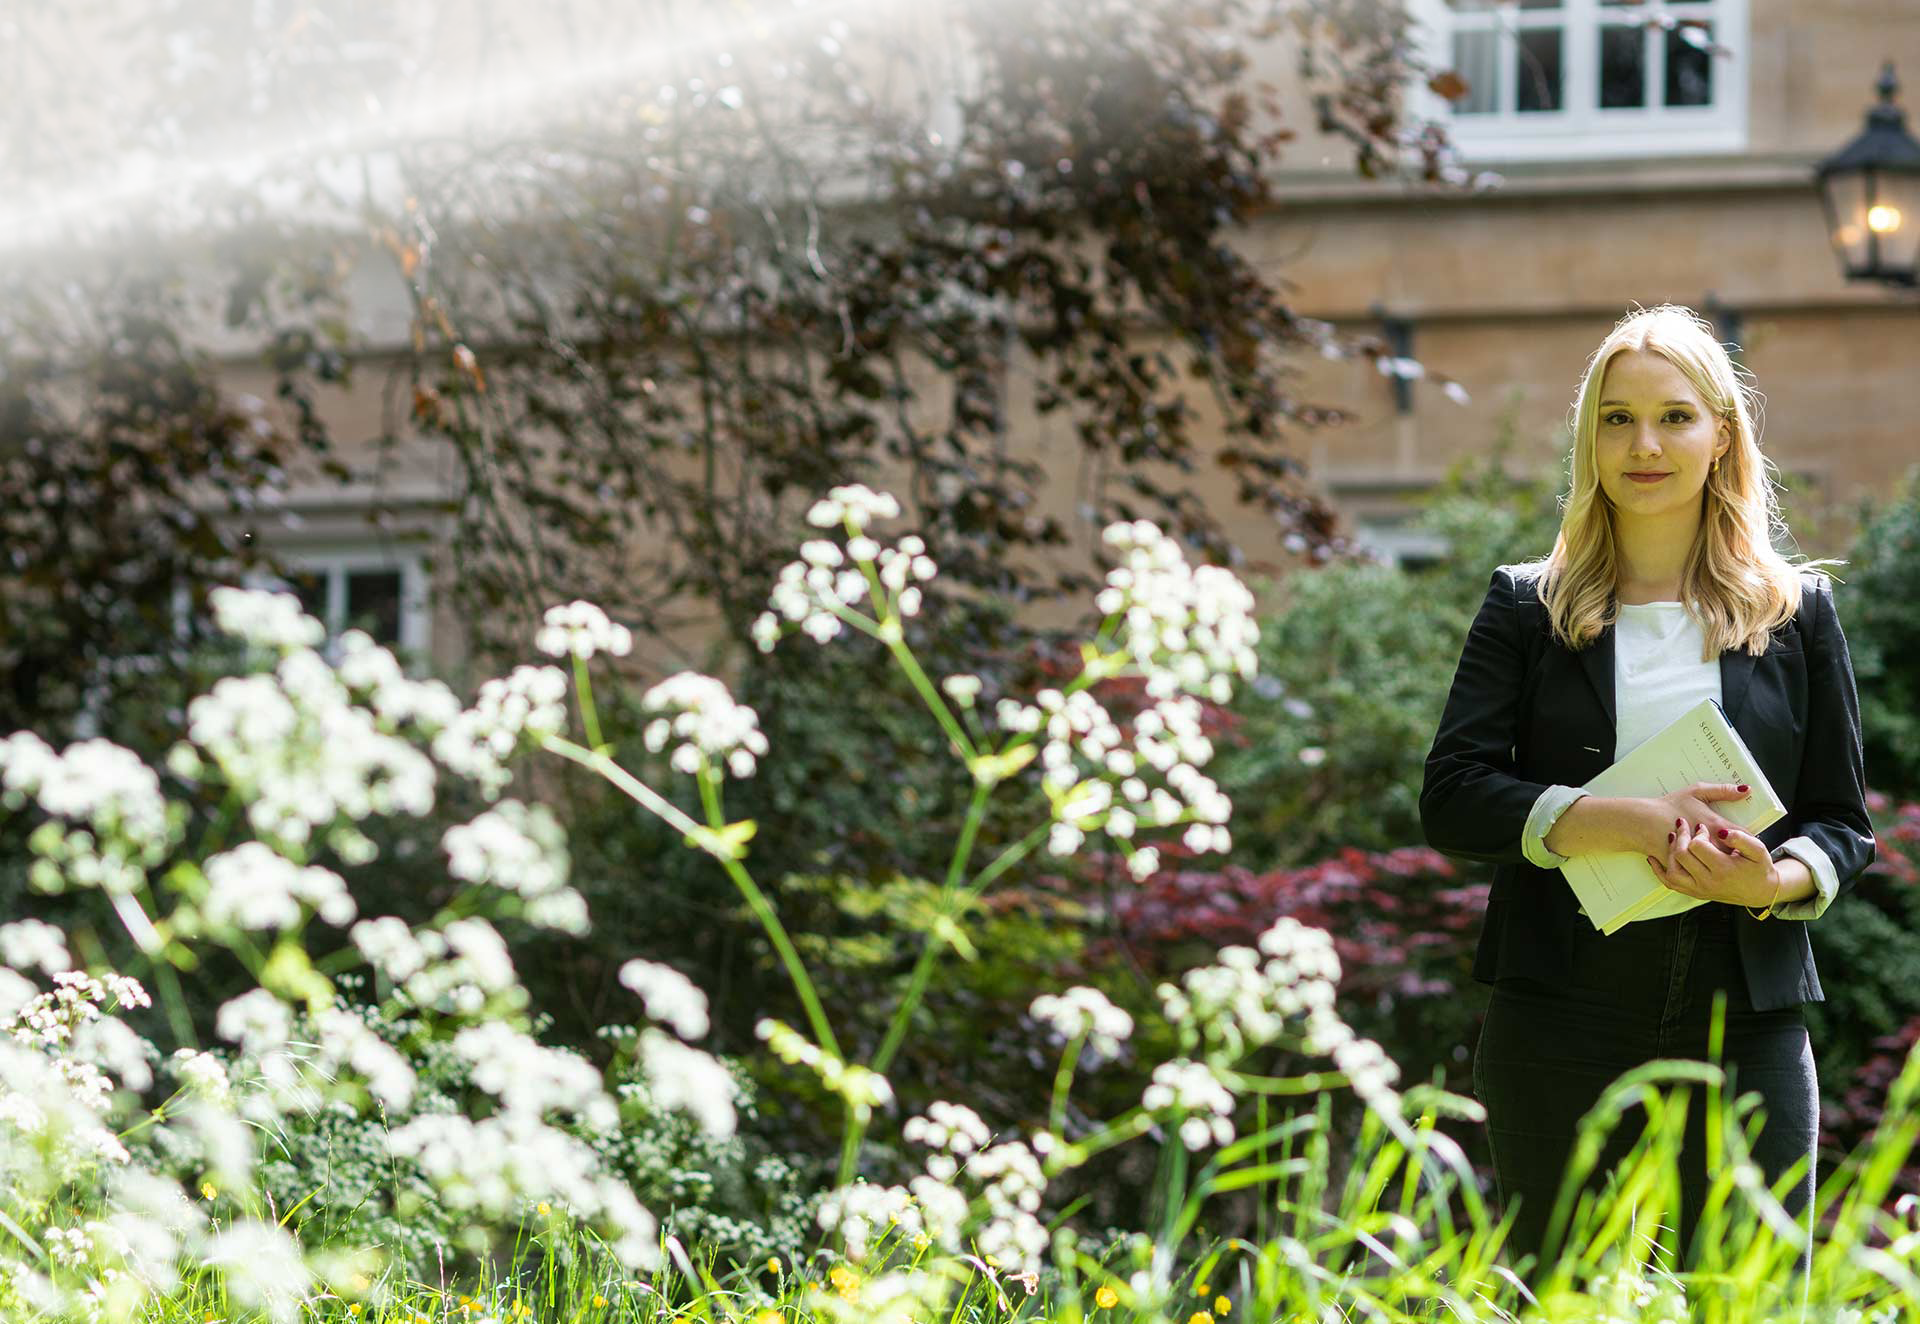 Sophie stands in the gardens of Balliol College on a sunny day.